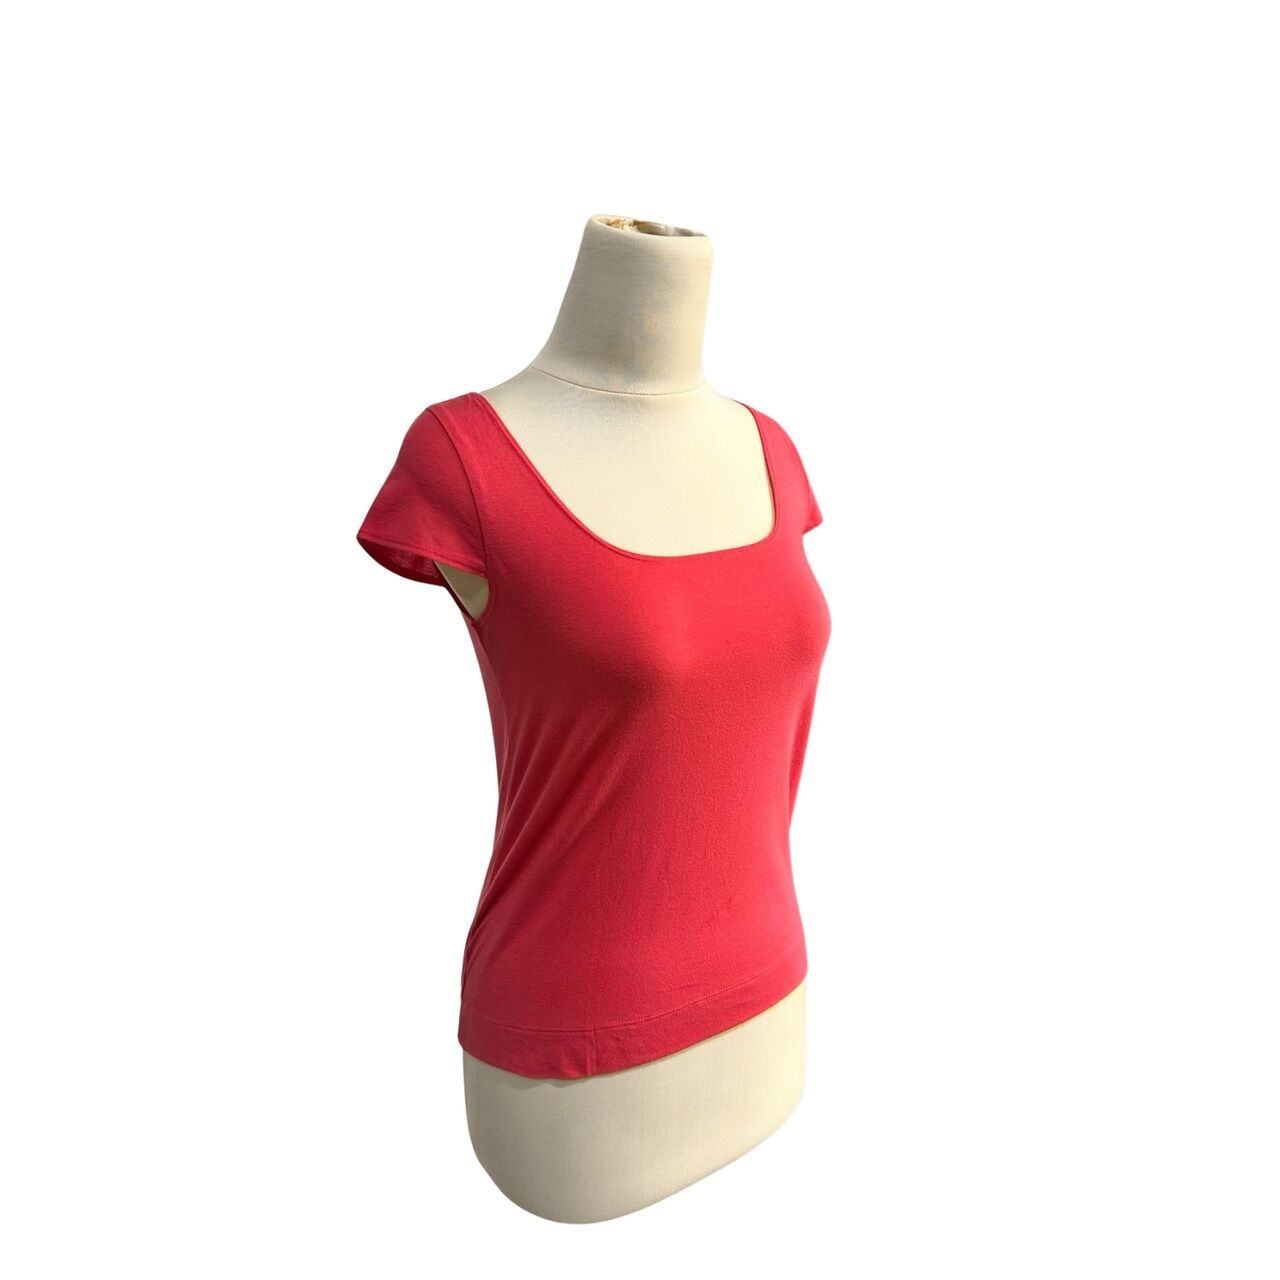 DKNY Red Top